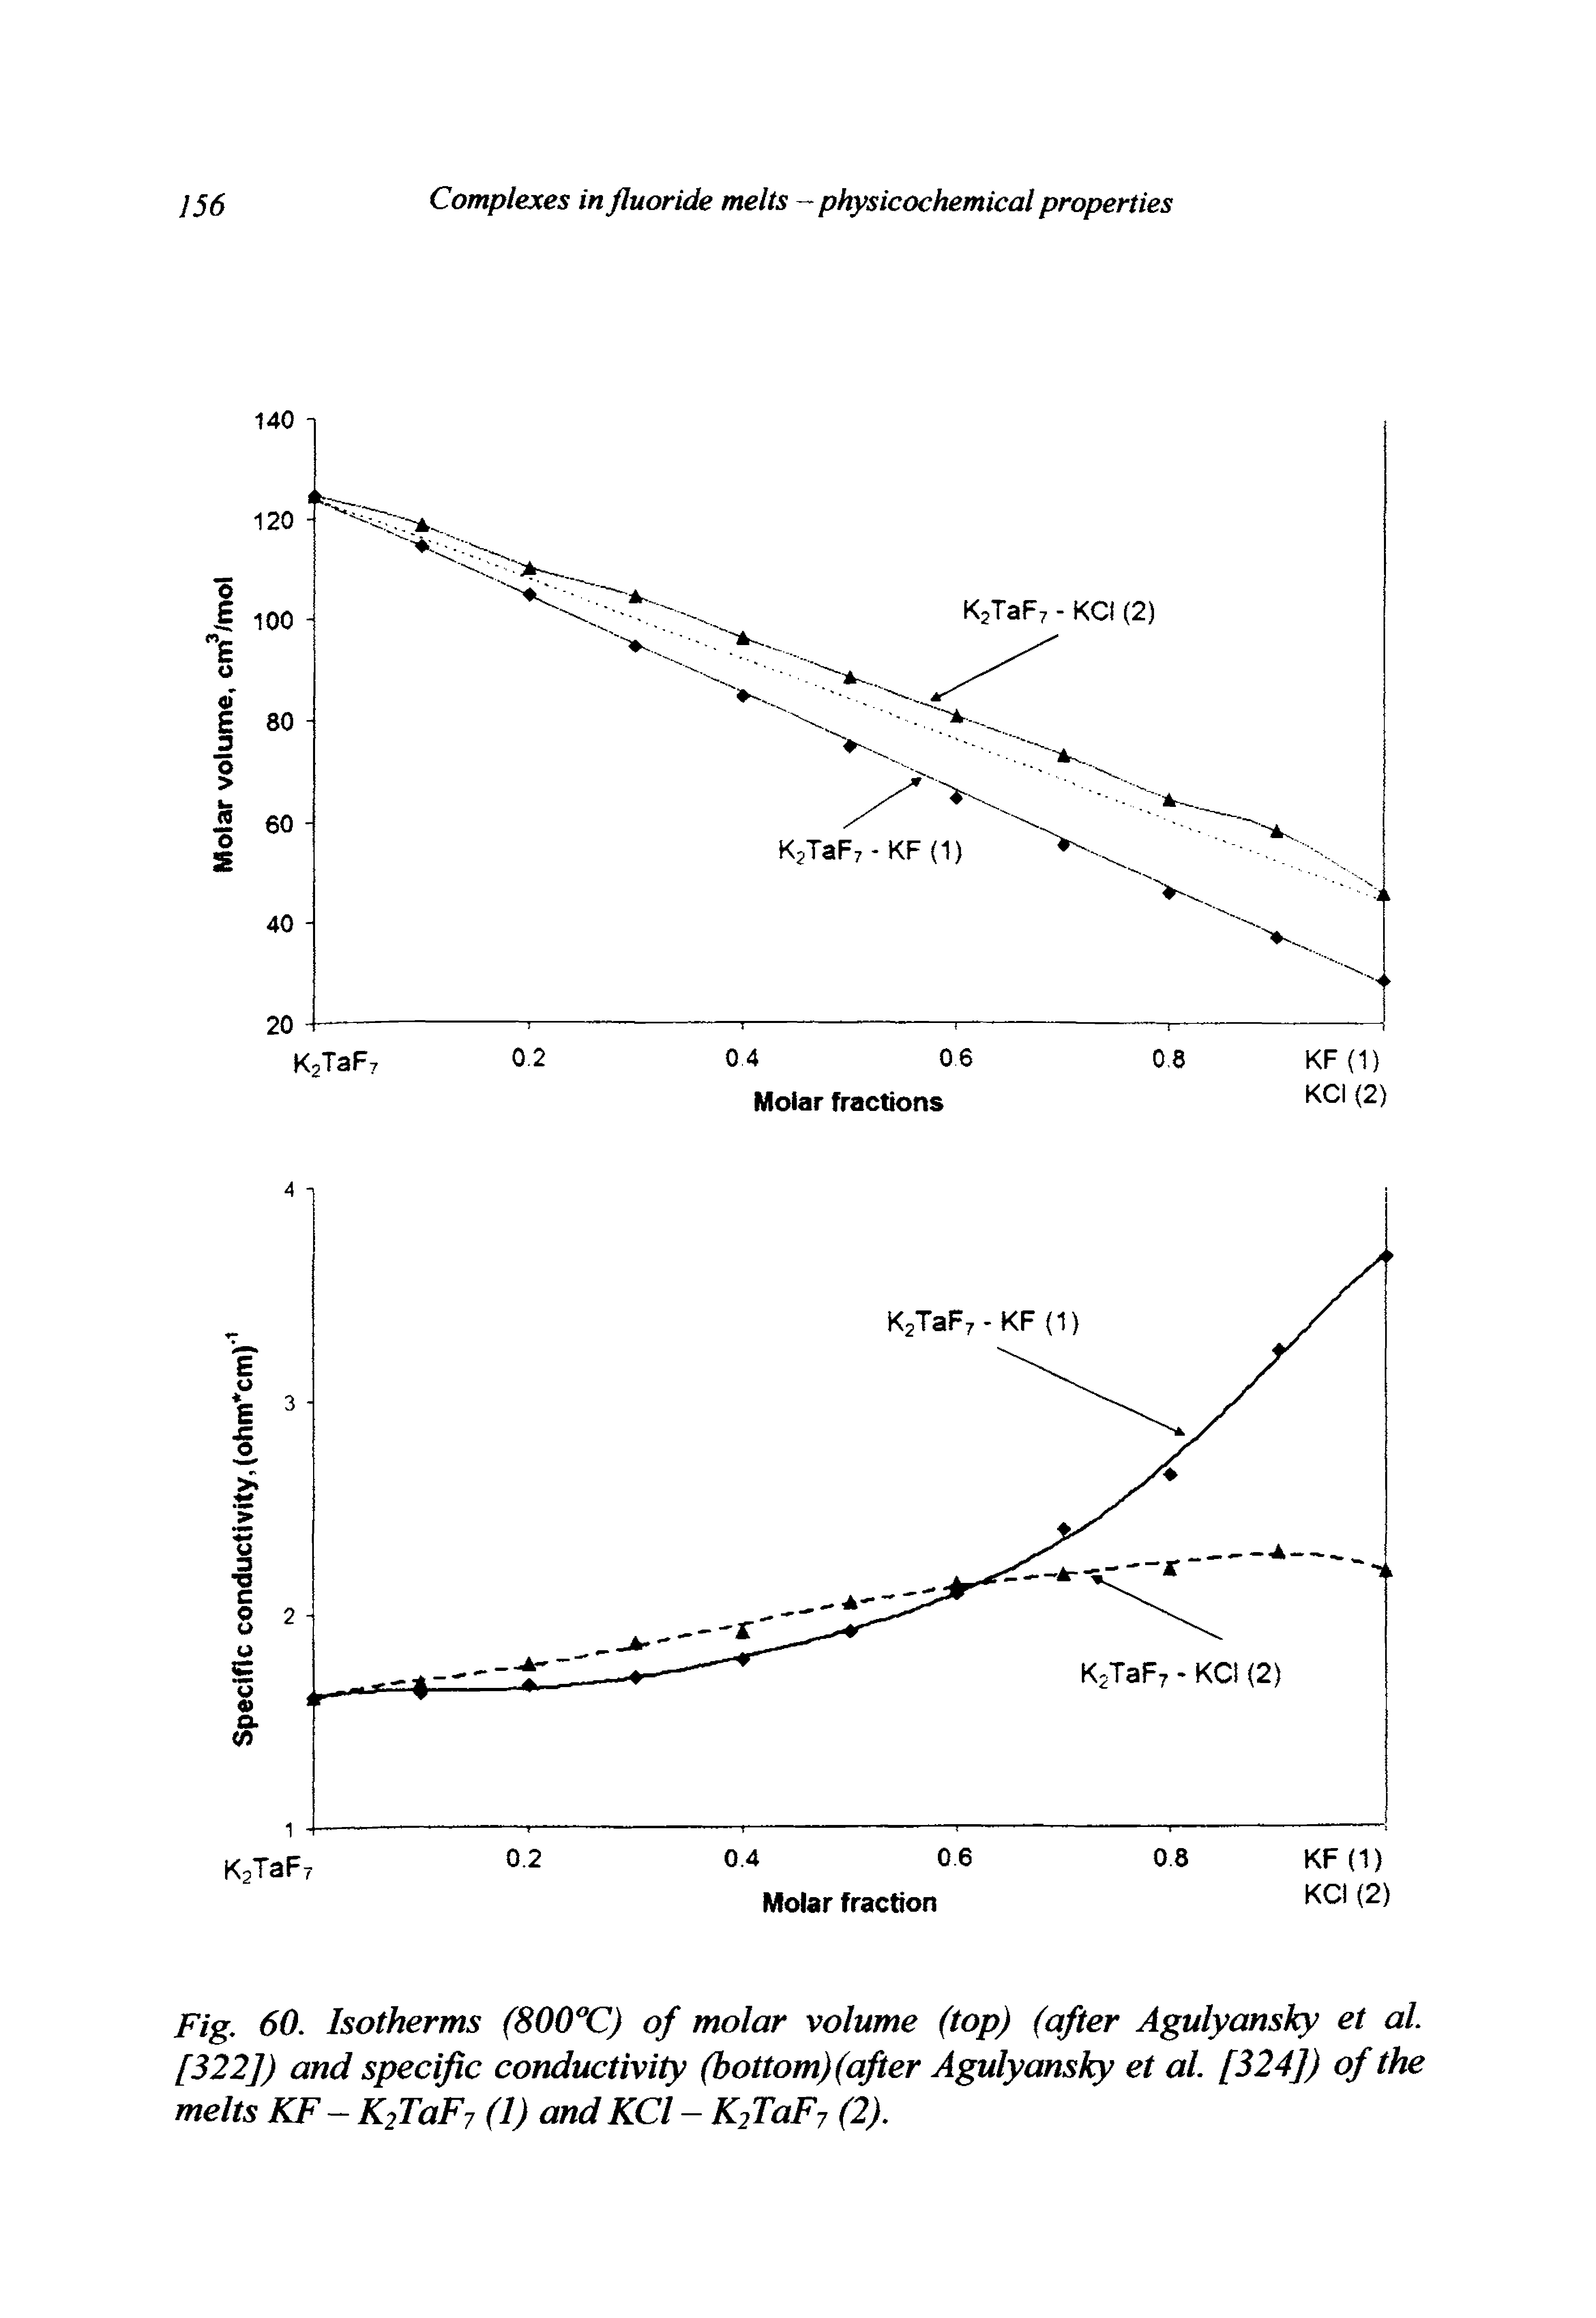 Fig. 60. Isotherms (800°C) of molar volume (top) (after Agulyansky et al. [322]) and specific conductivity (bottom) (after Agulyansky et al. [3241) of the melts KF- K2TaF7 (I) andKCl - K2TaF7 (2).